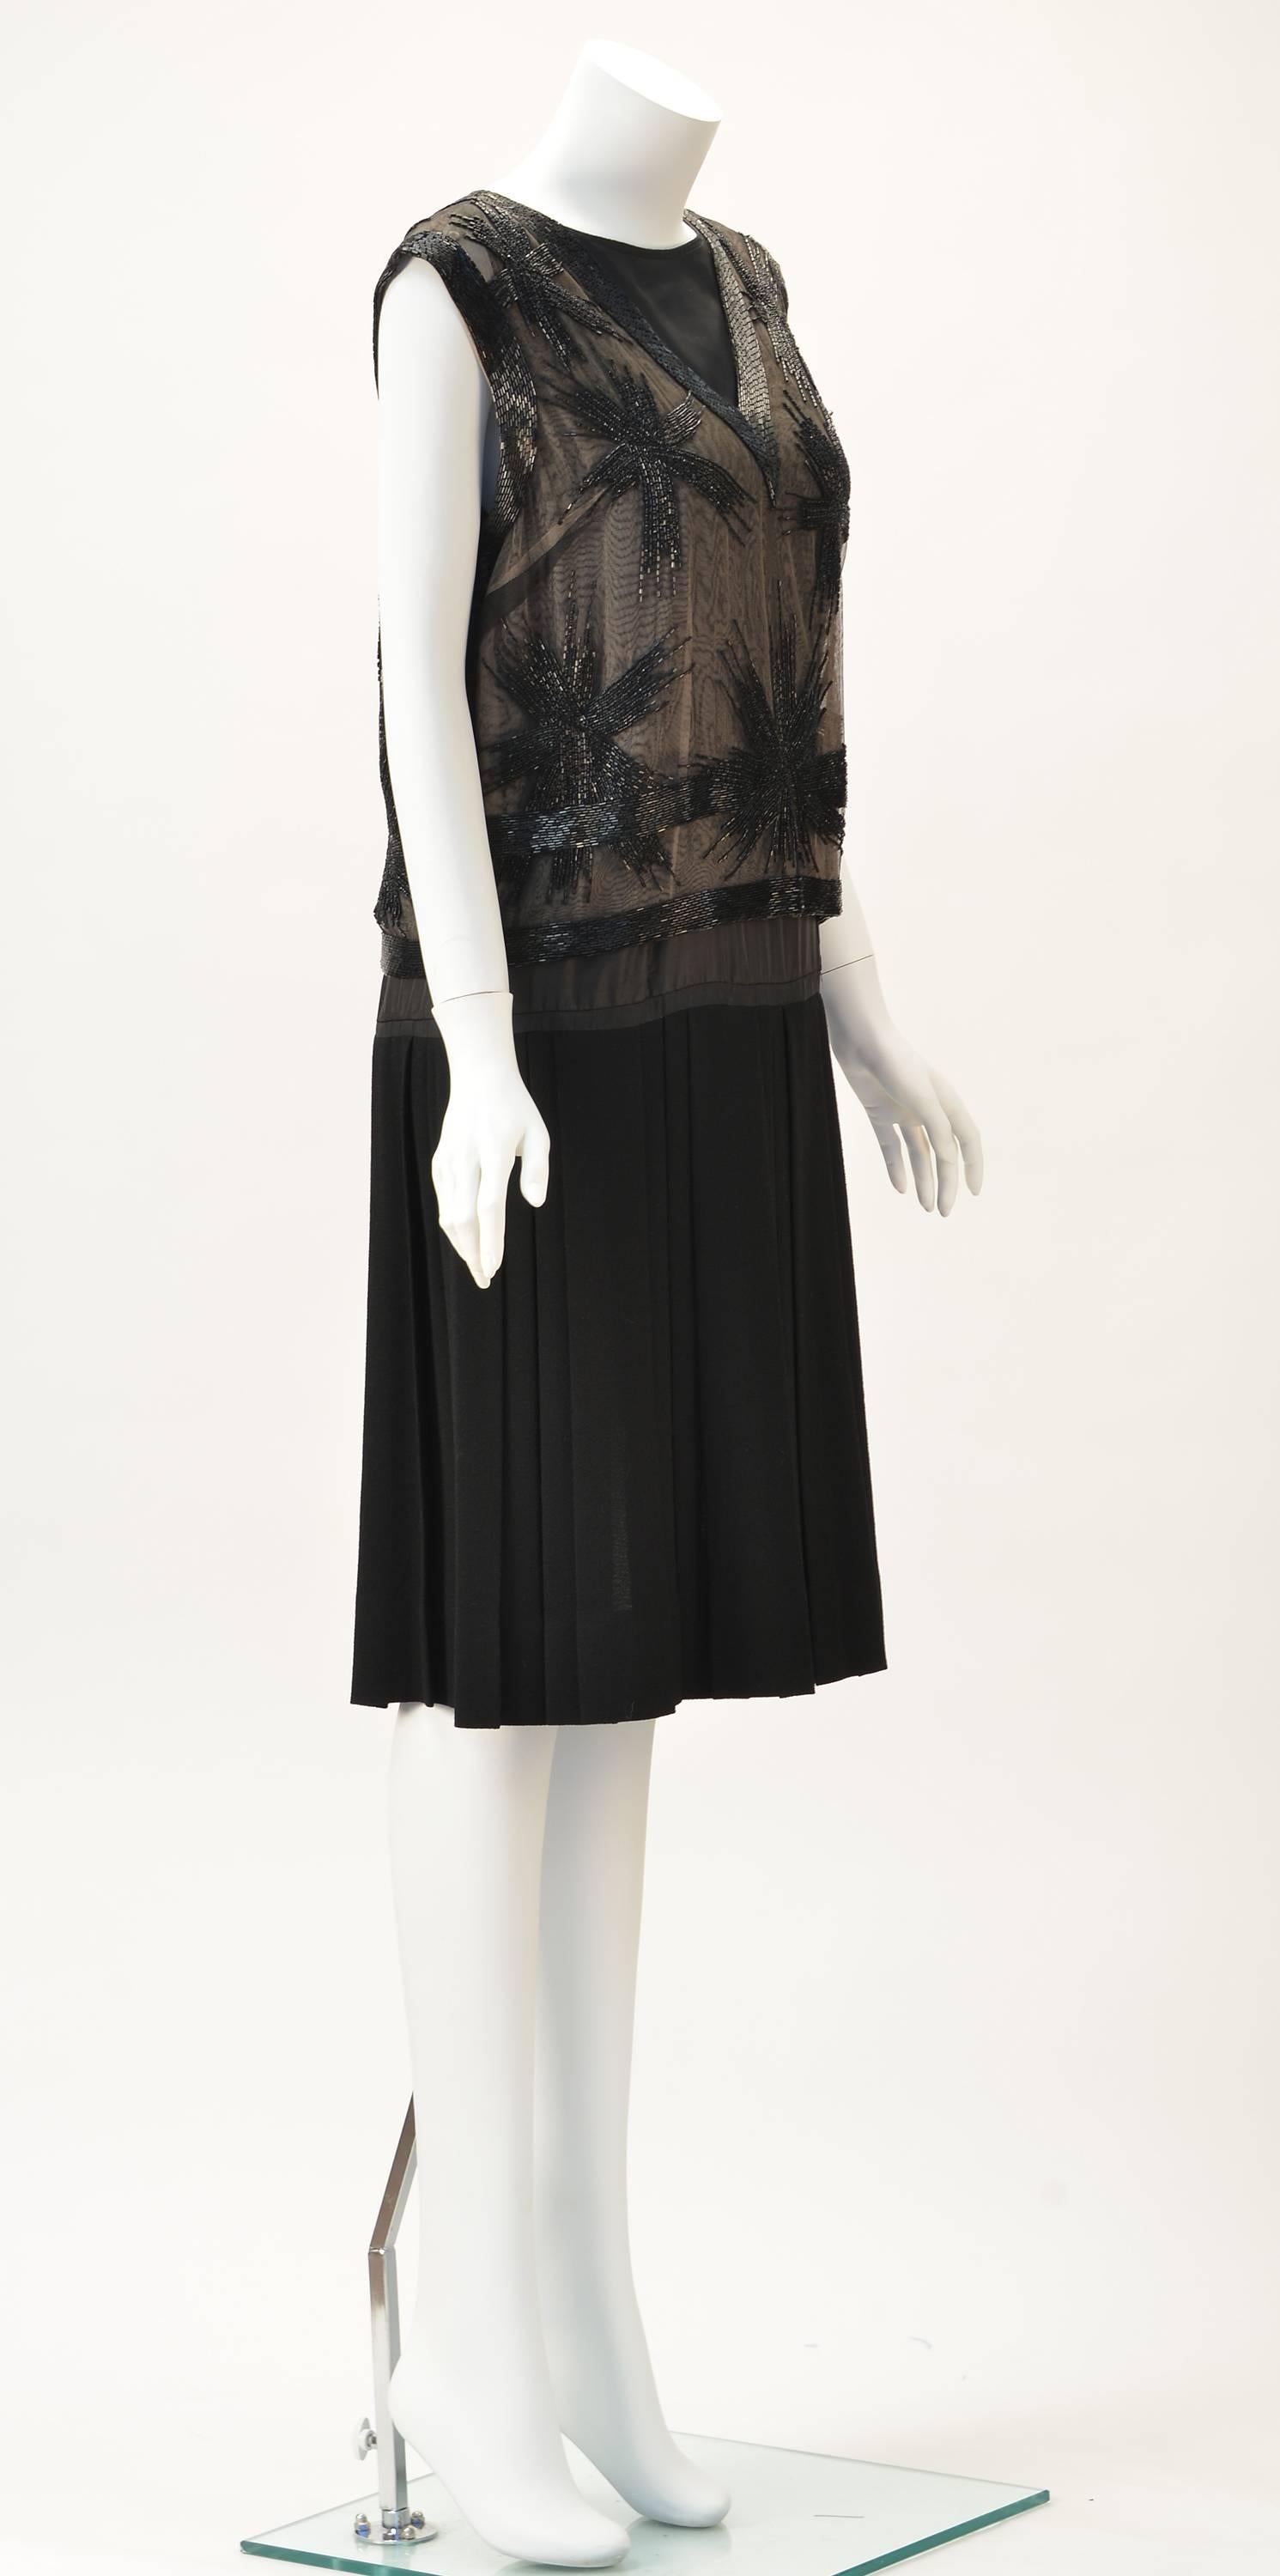 Striking Malcolm Starr black crepe dress with pleated skirt. Sleeveless under-dress with sheer beaded top. The top is nude sheer with hand sewn beading in a star pattern all over. V- neck. Snaps in back. Back closes with hooks and eyes as well.